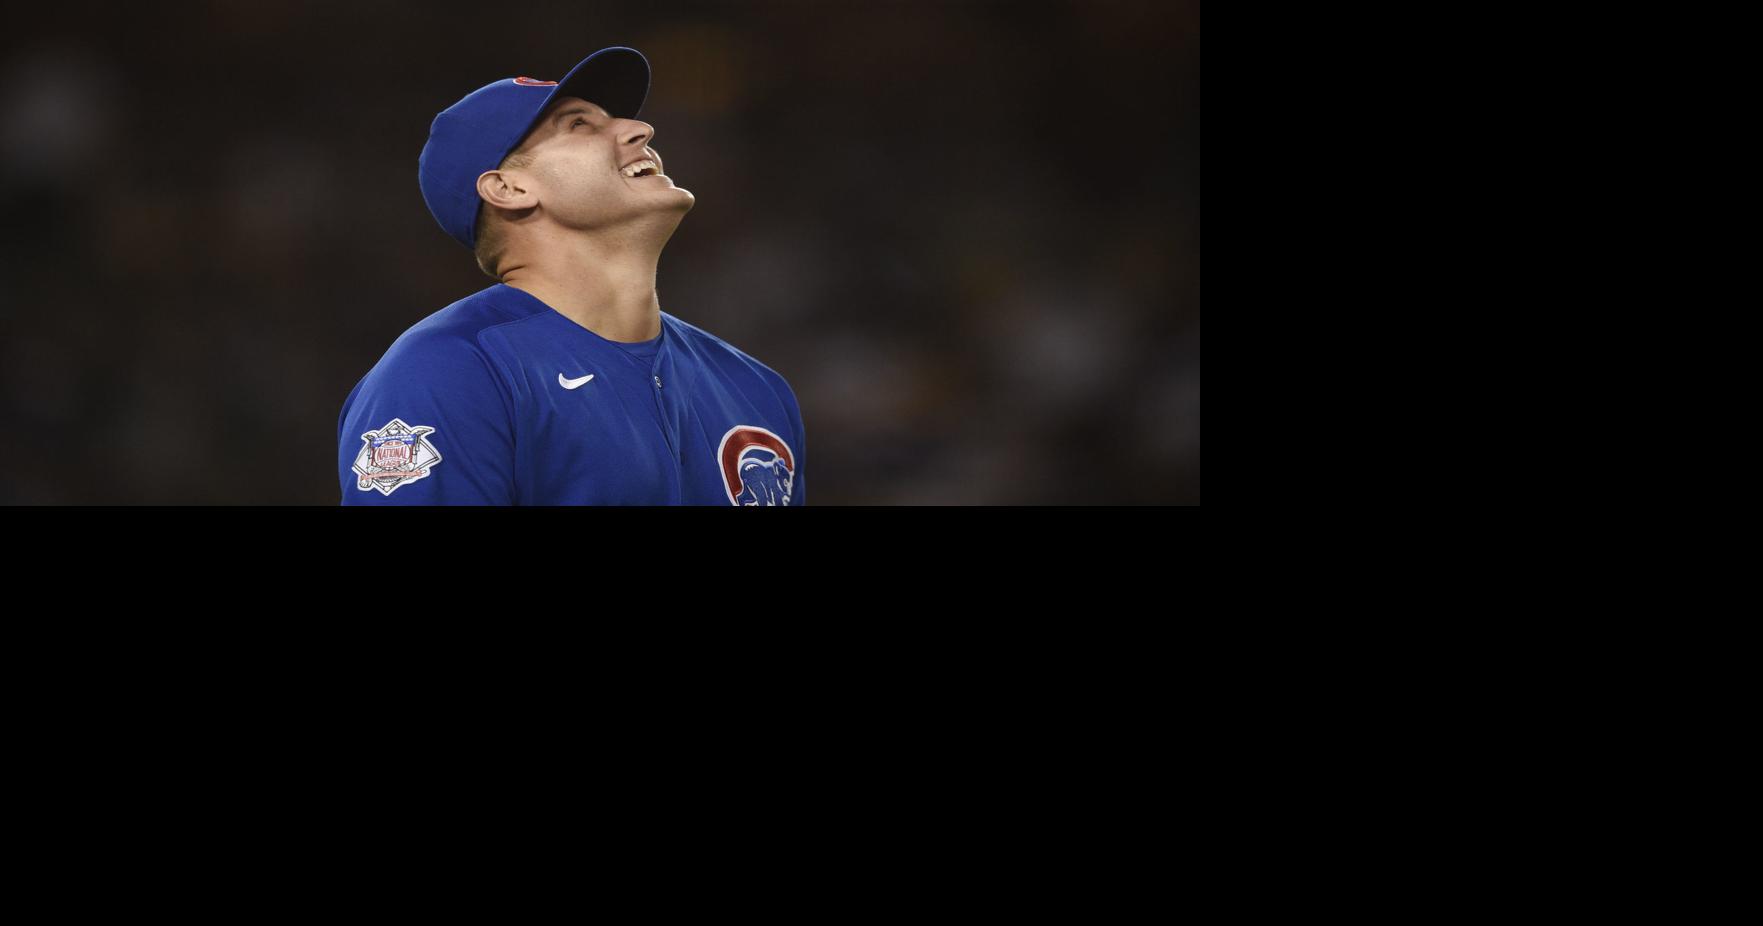 Yankees' Anthony Rizzo takes shot at Cubs' Jed Hoyer for deadline trades 